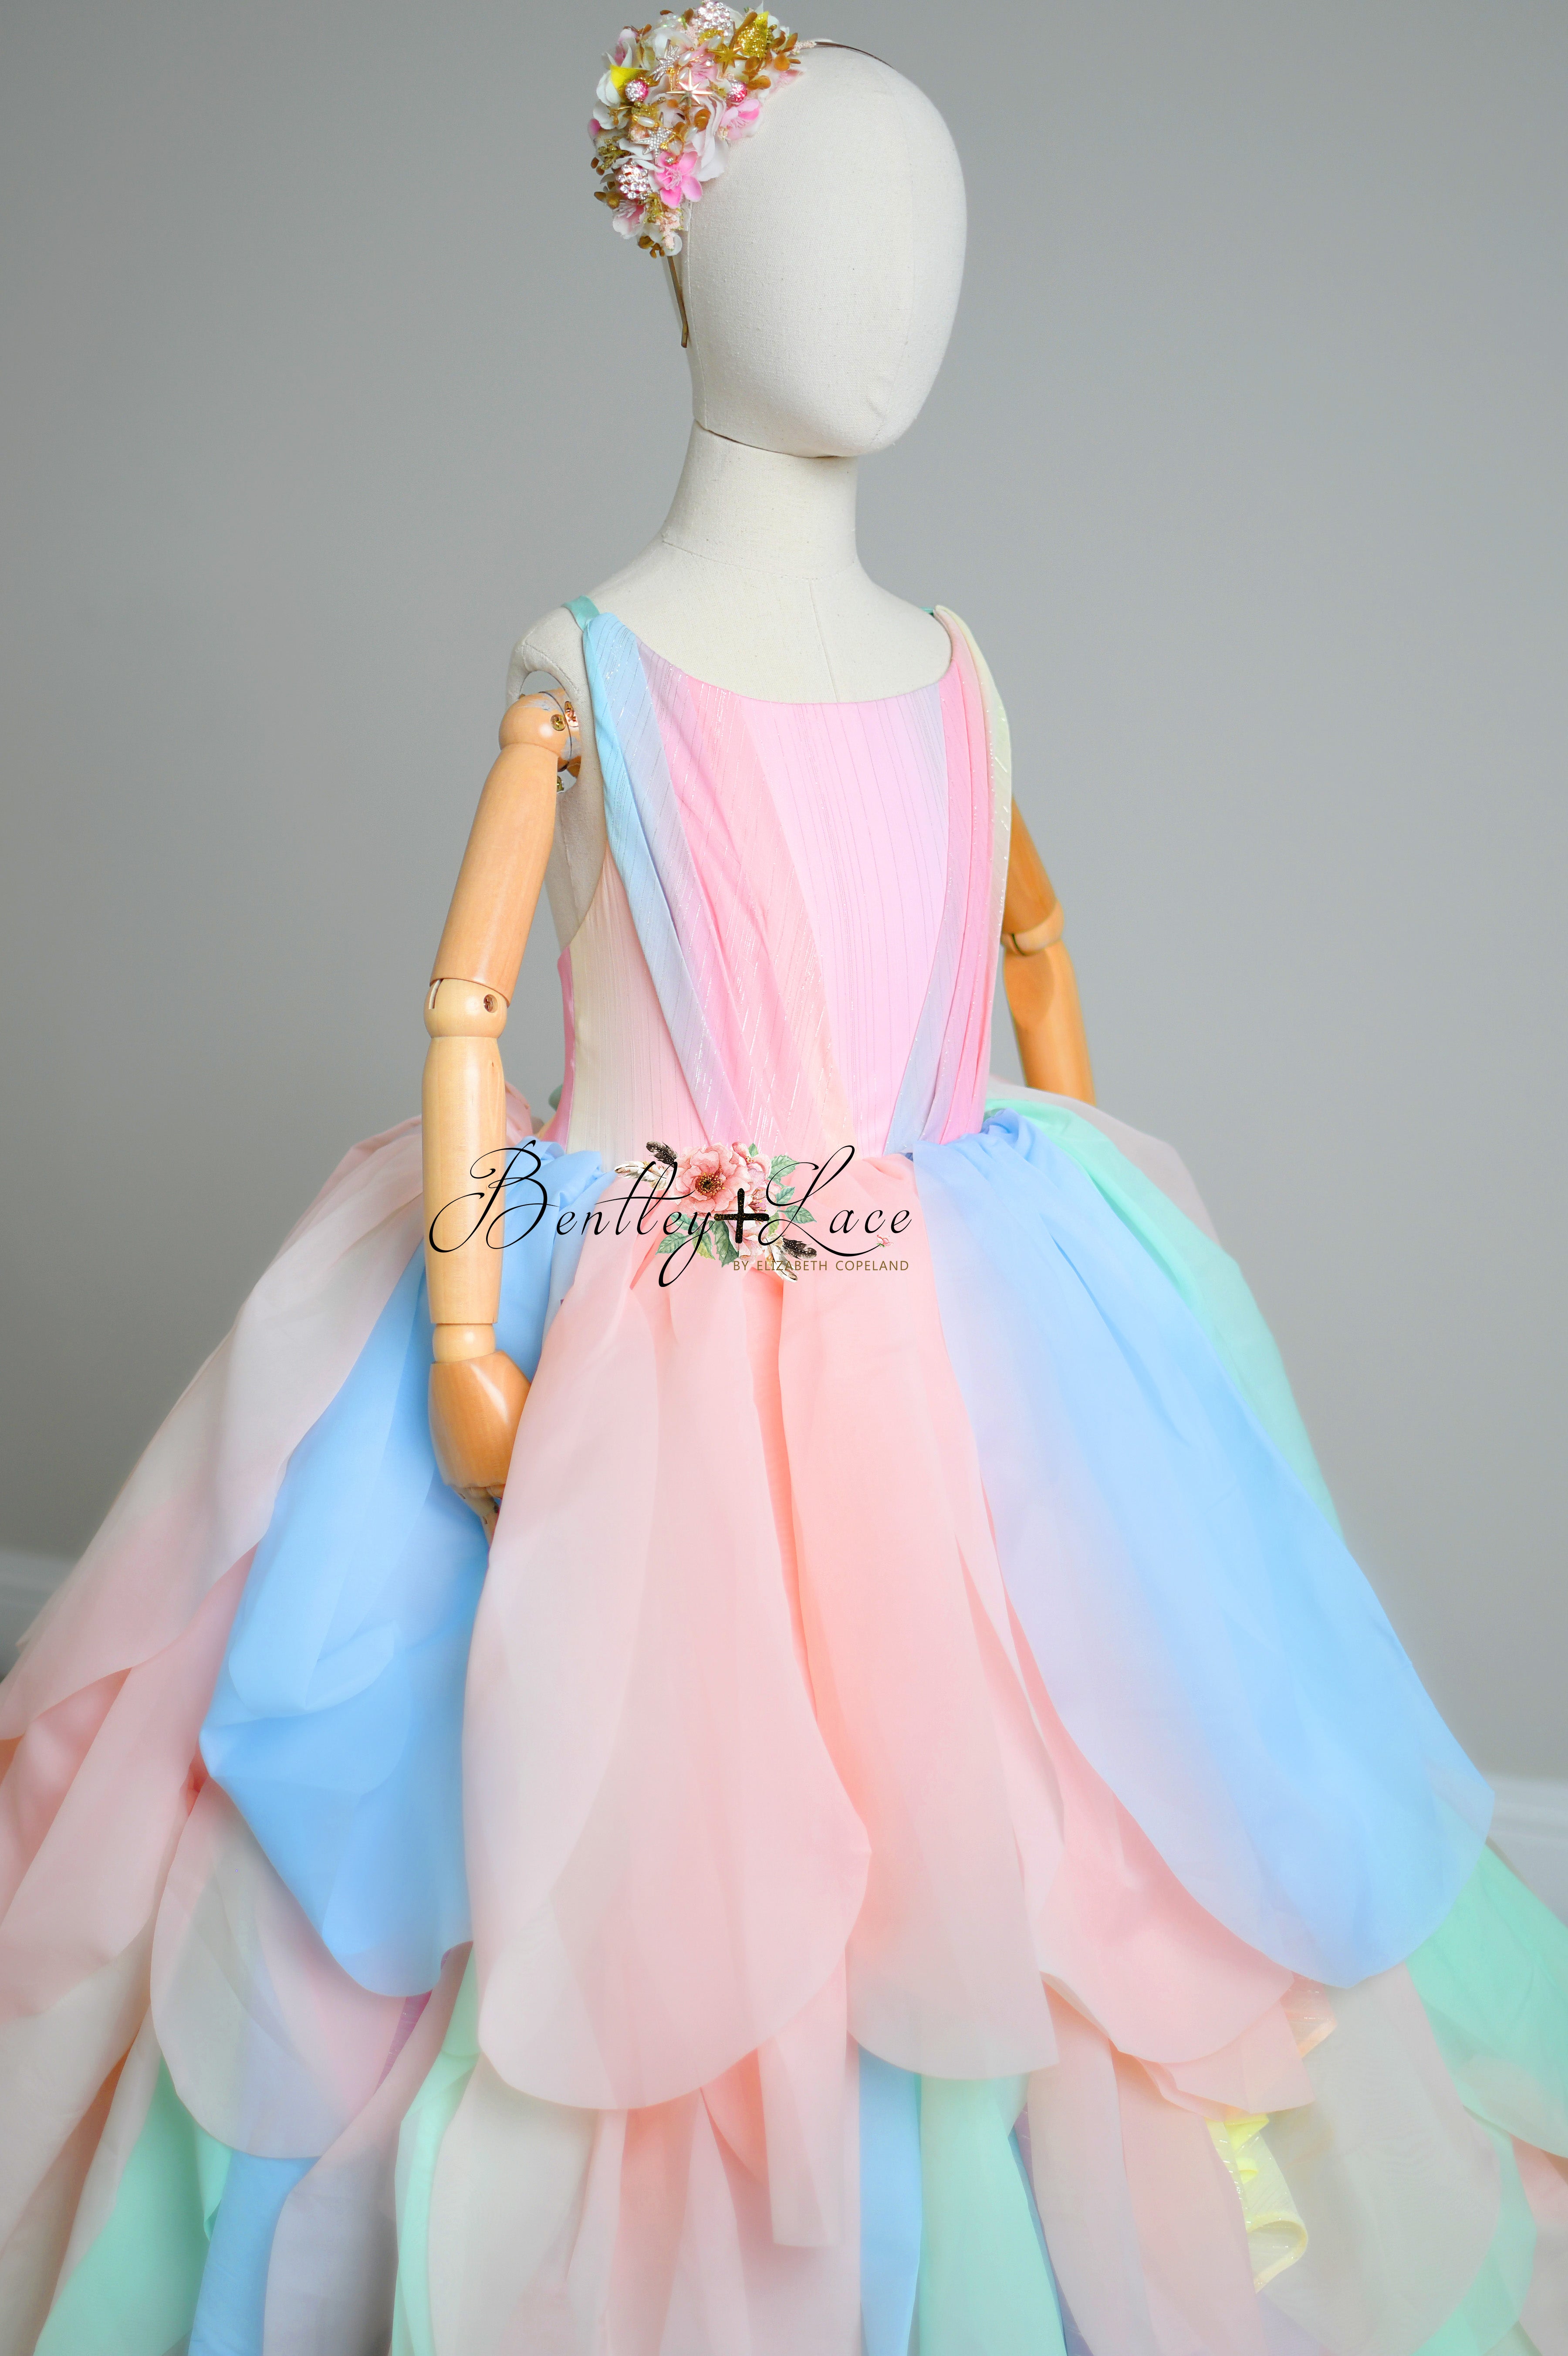 LIMITED EDITION COUTURE  GOWN "PETAL WHISPERS" PASTEL - FLOOR LENGTH DRESS  Editorial Dress, Couture Gown, Special Occasion Dress